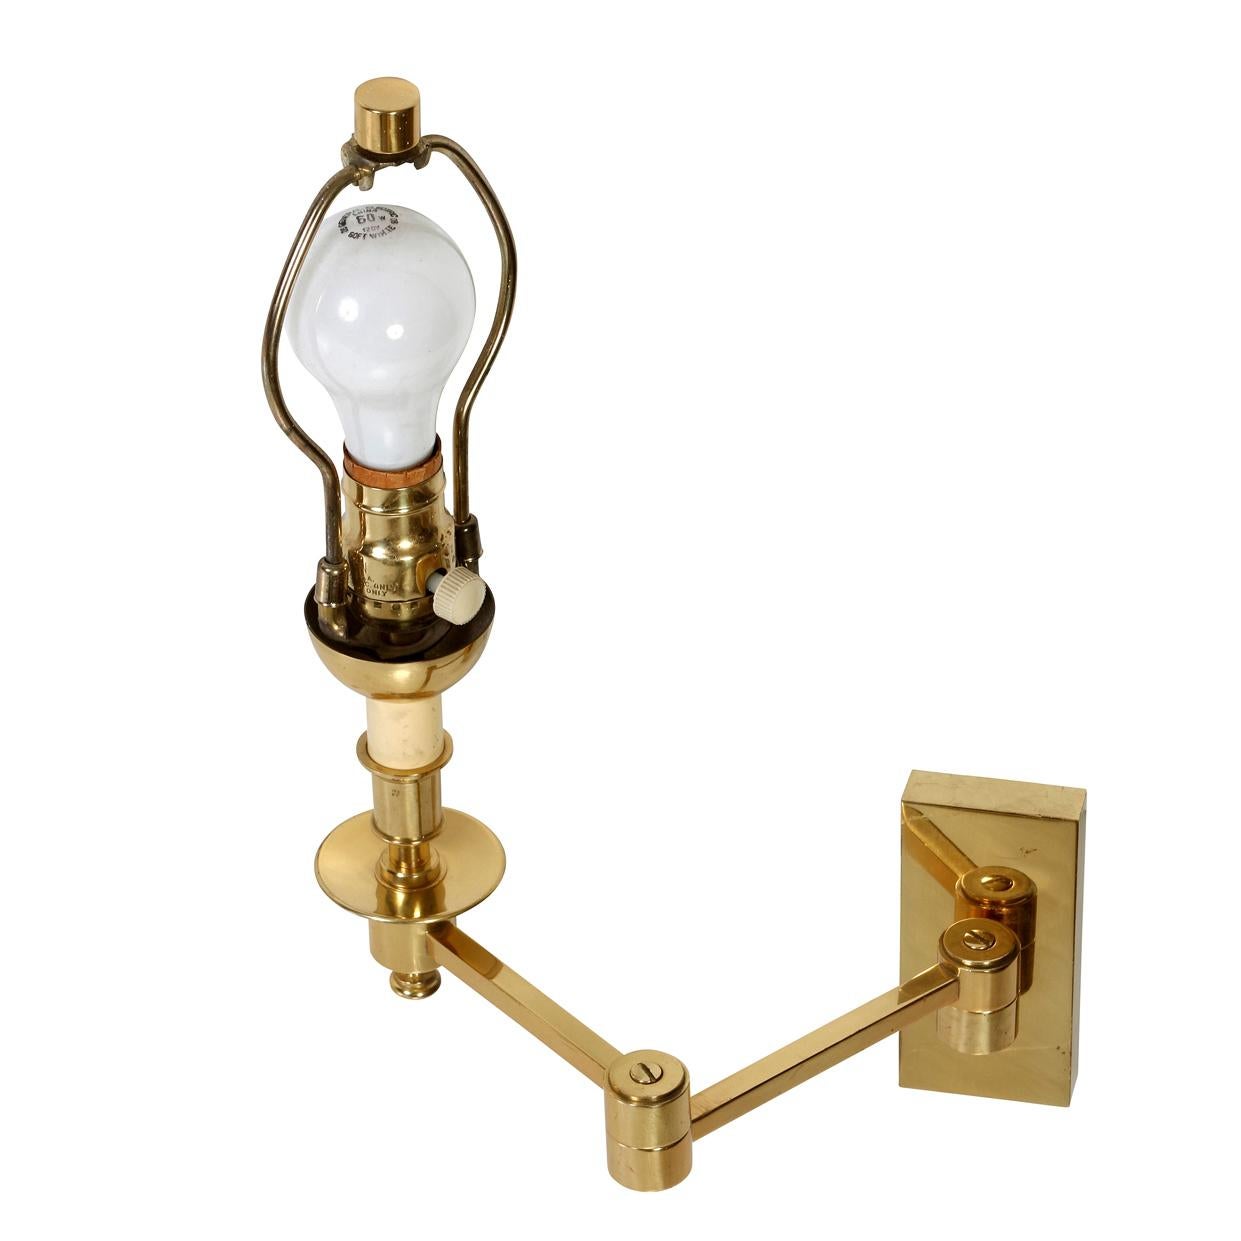 A pair of classic brass swing arm wall lights with a rectangular back plate from a high quality lighting manufacturer.  The simplicity of the design blends with traditional design or contemporary styles.  The light when fully extended measures14